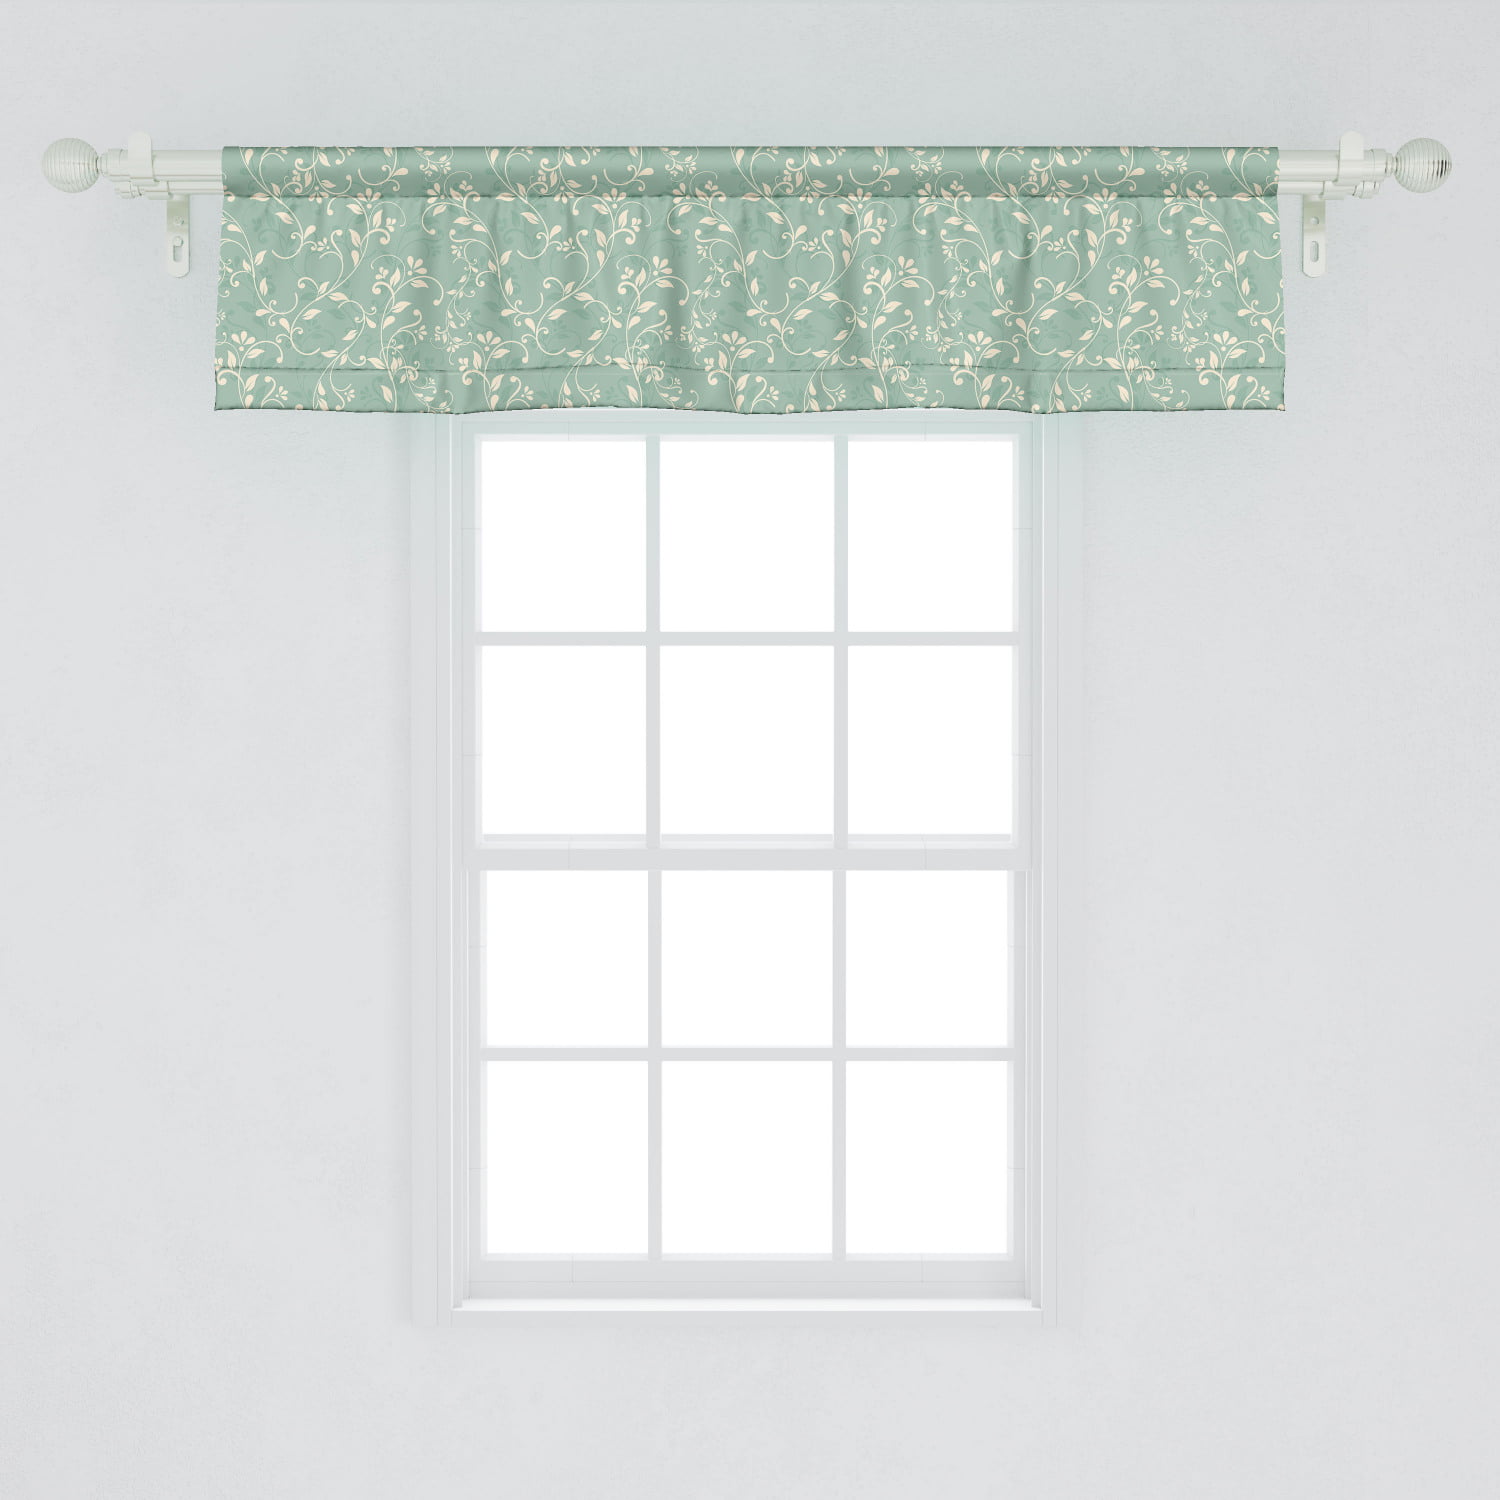 Ambesonne Vine Window Valance, Vintage Style Foliage with Intermingled  Branches Curvy Leaf, Curtain Valance for Kitchen Bedroom Decor with Rod  Pocket, ...